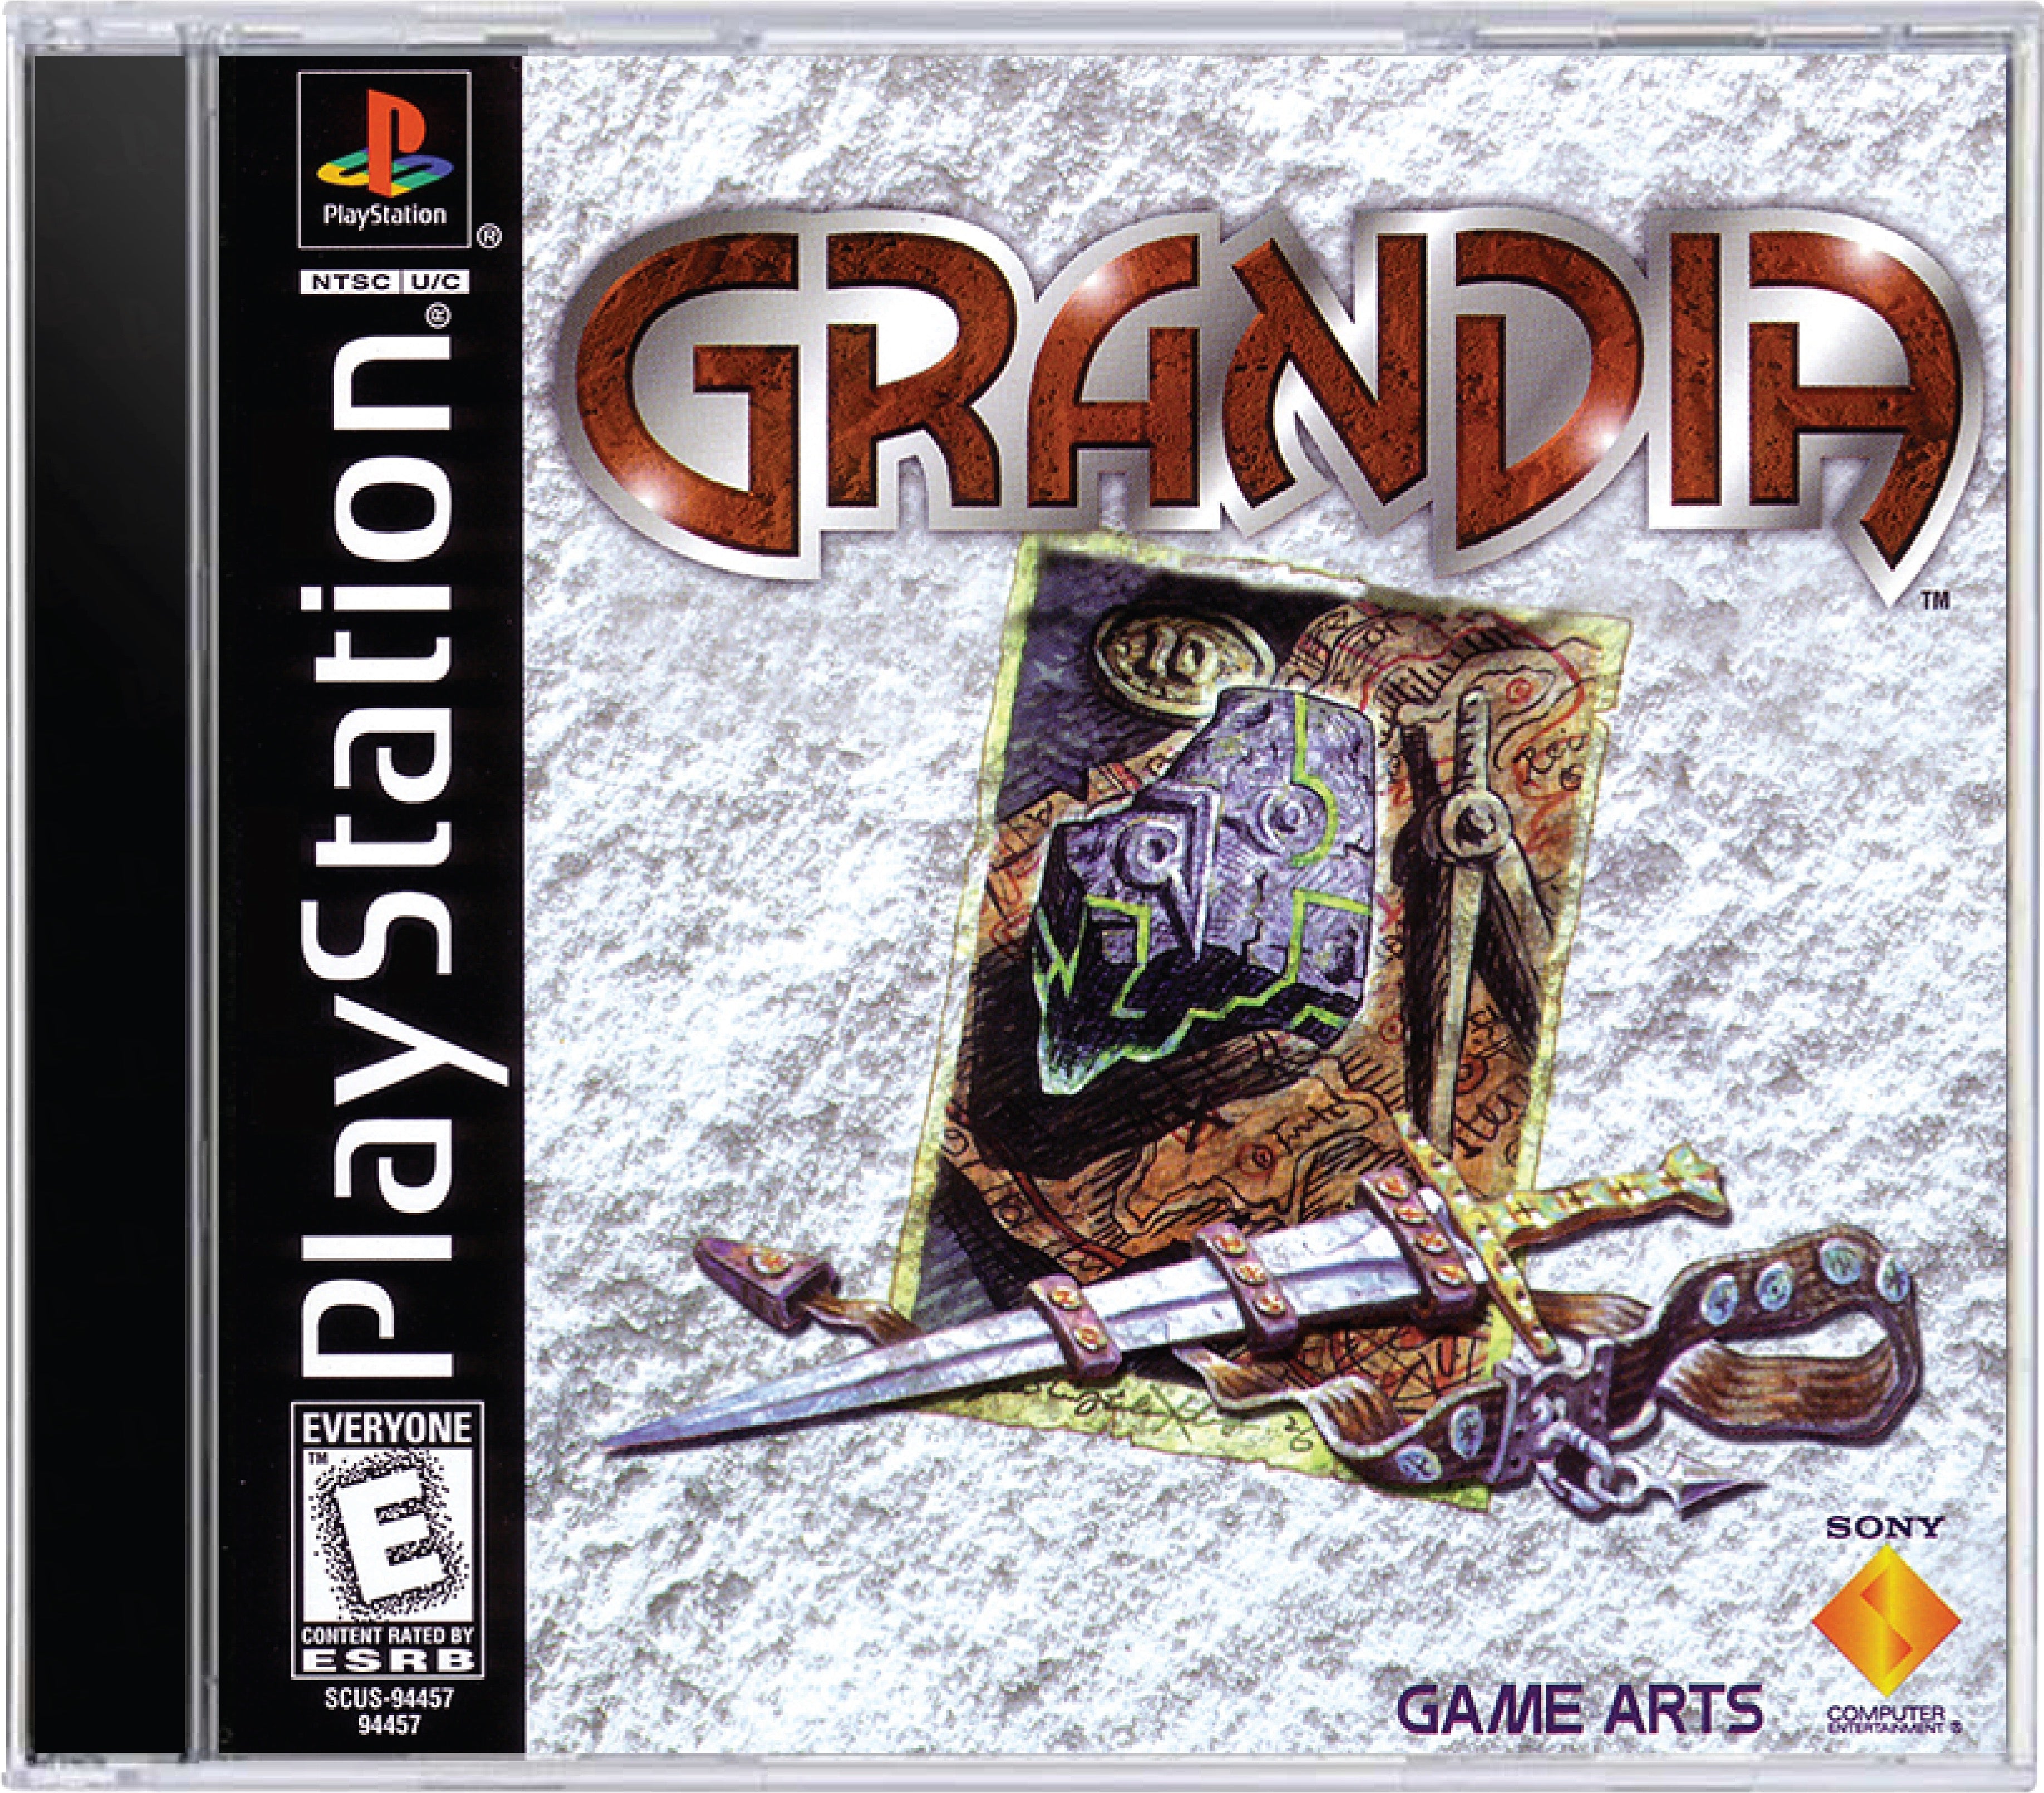 Grandia Cover Art and Product Photo